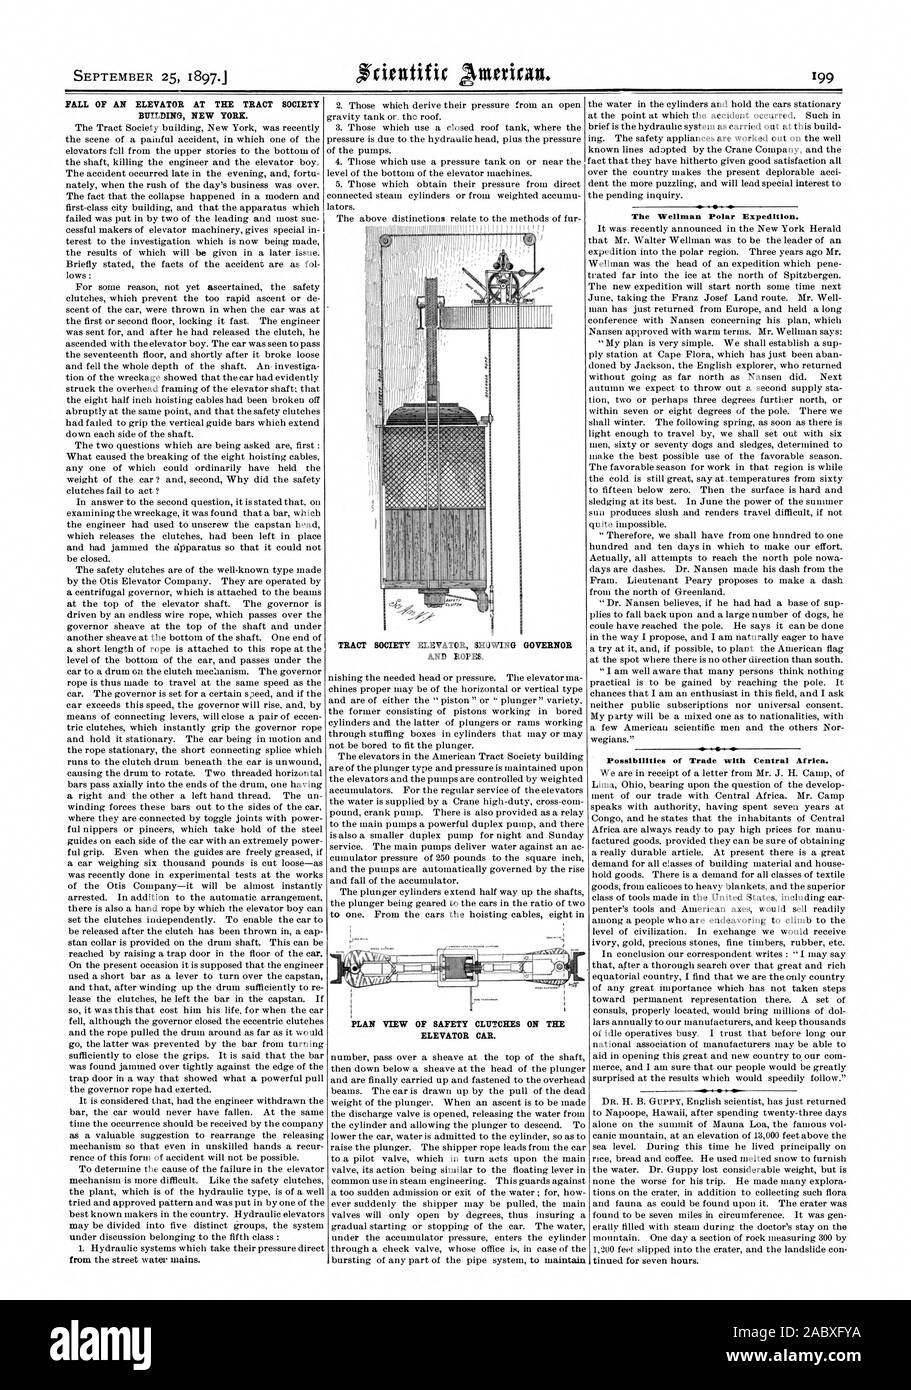 FALL OF AN ELEVATOR AT THE TRACT SOCIETY BUILDING NEW YORK. TRACT SOCIETY ELEVATOR SHOWING GOVERNOR AND ROPES. PLAN VIEW OF SAFETY CLUTCHES ON THE ELEVATOR CAR. The Wellman Polar Expedition. Possibilities of Trade with Central Africa., scientific american, 1897-09-25 Stock Photo